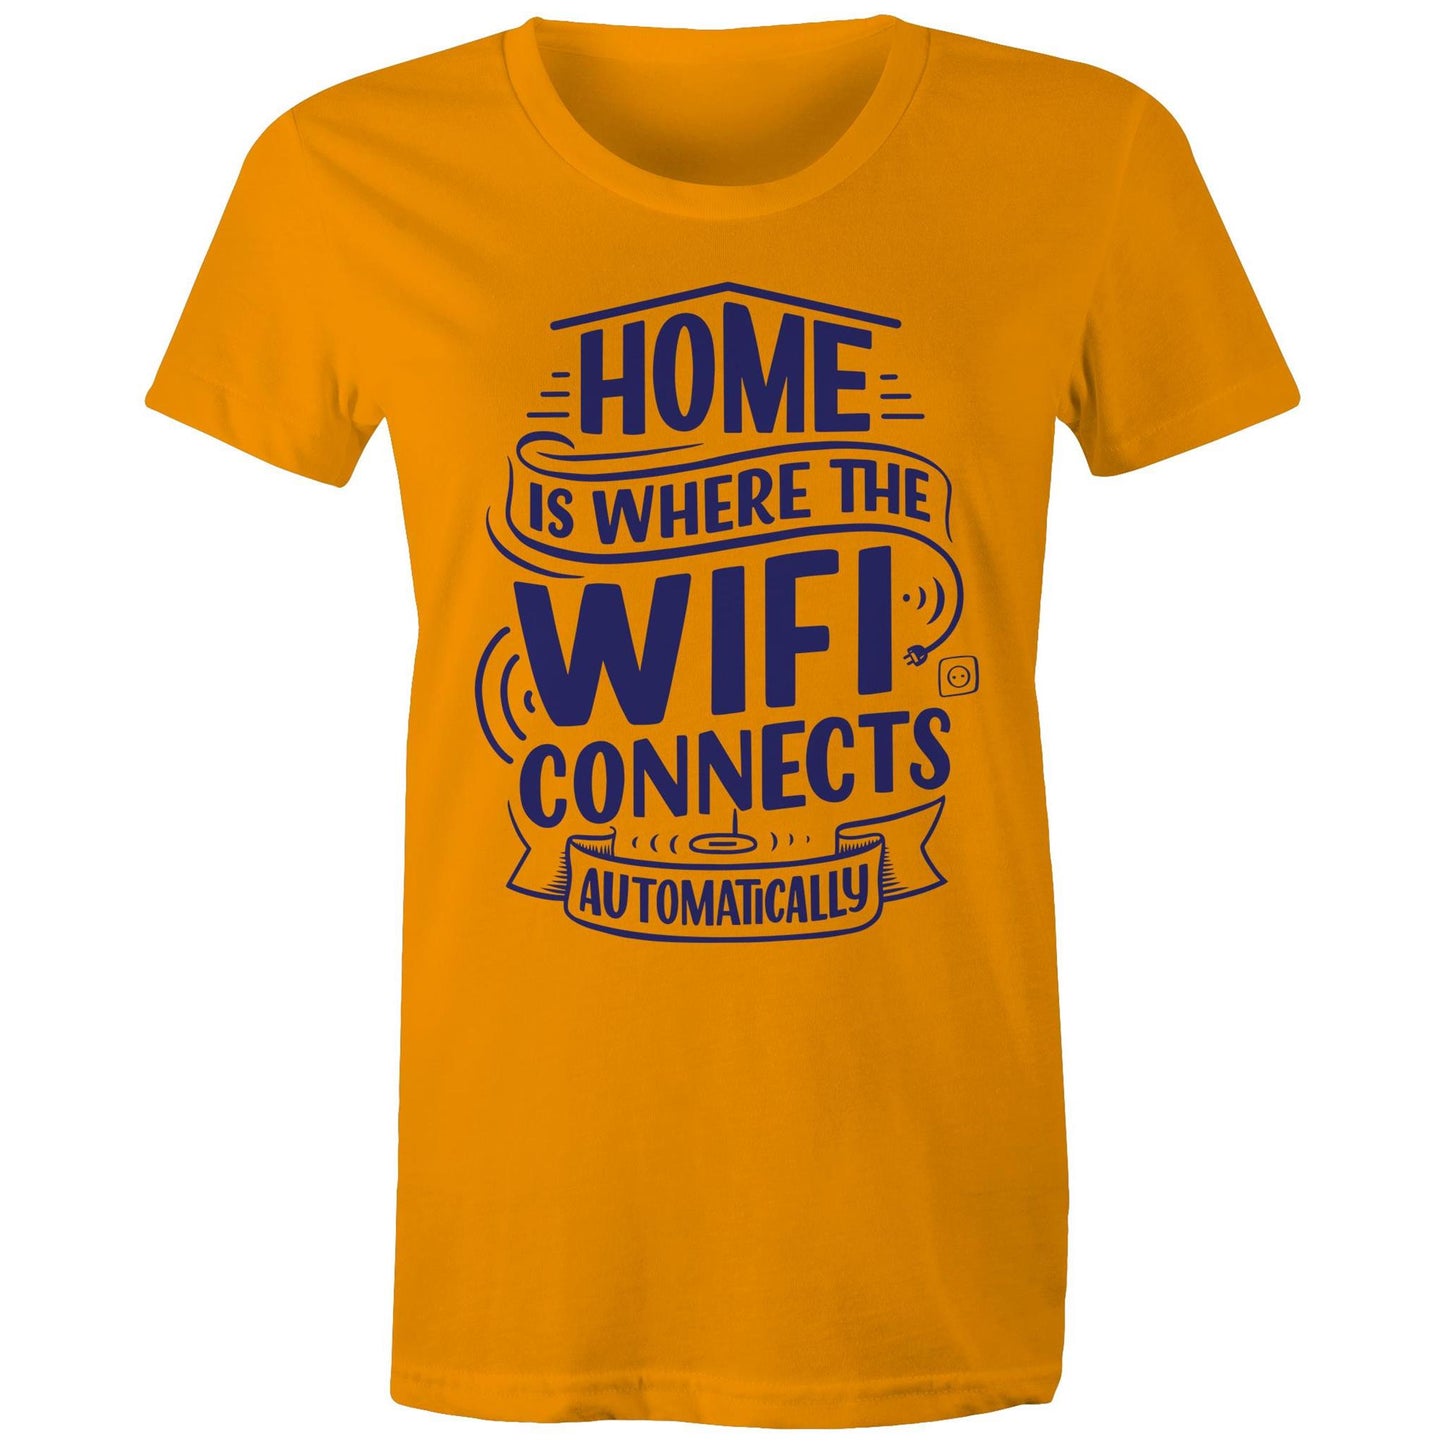 Home Is Where The WIFI Connects Automatically - Womens T-shirt Orange Womens T-shirt Tech